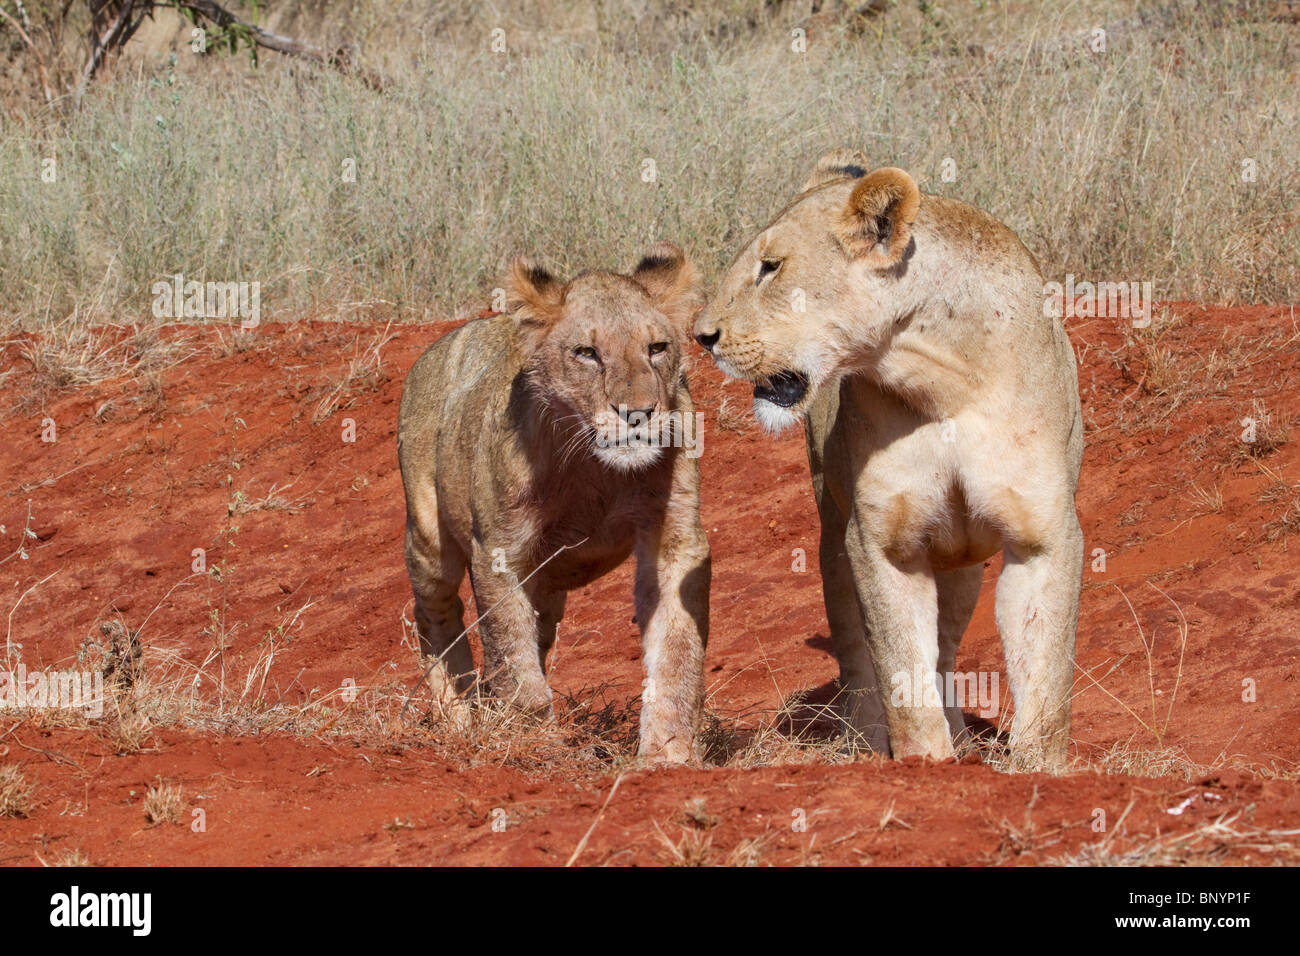 Mother lioness with a cub, Tsavo East National park, Kenya. Stock Photo